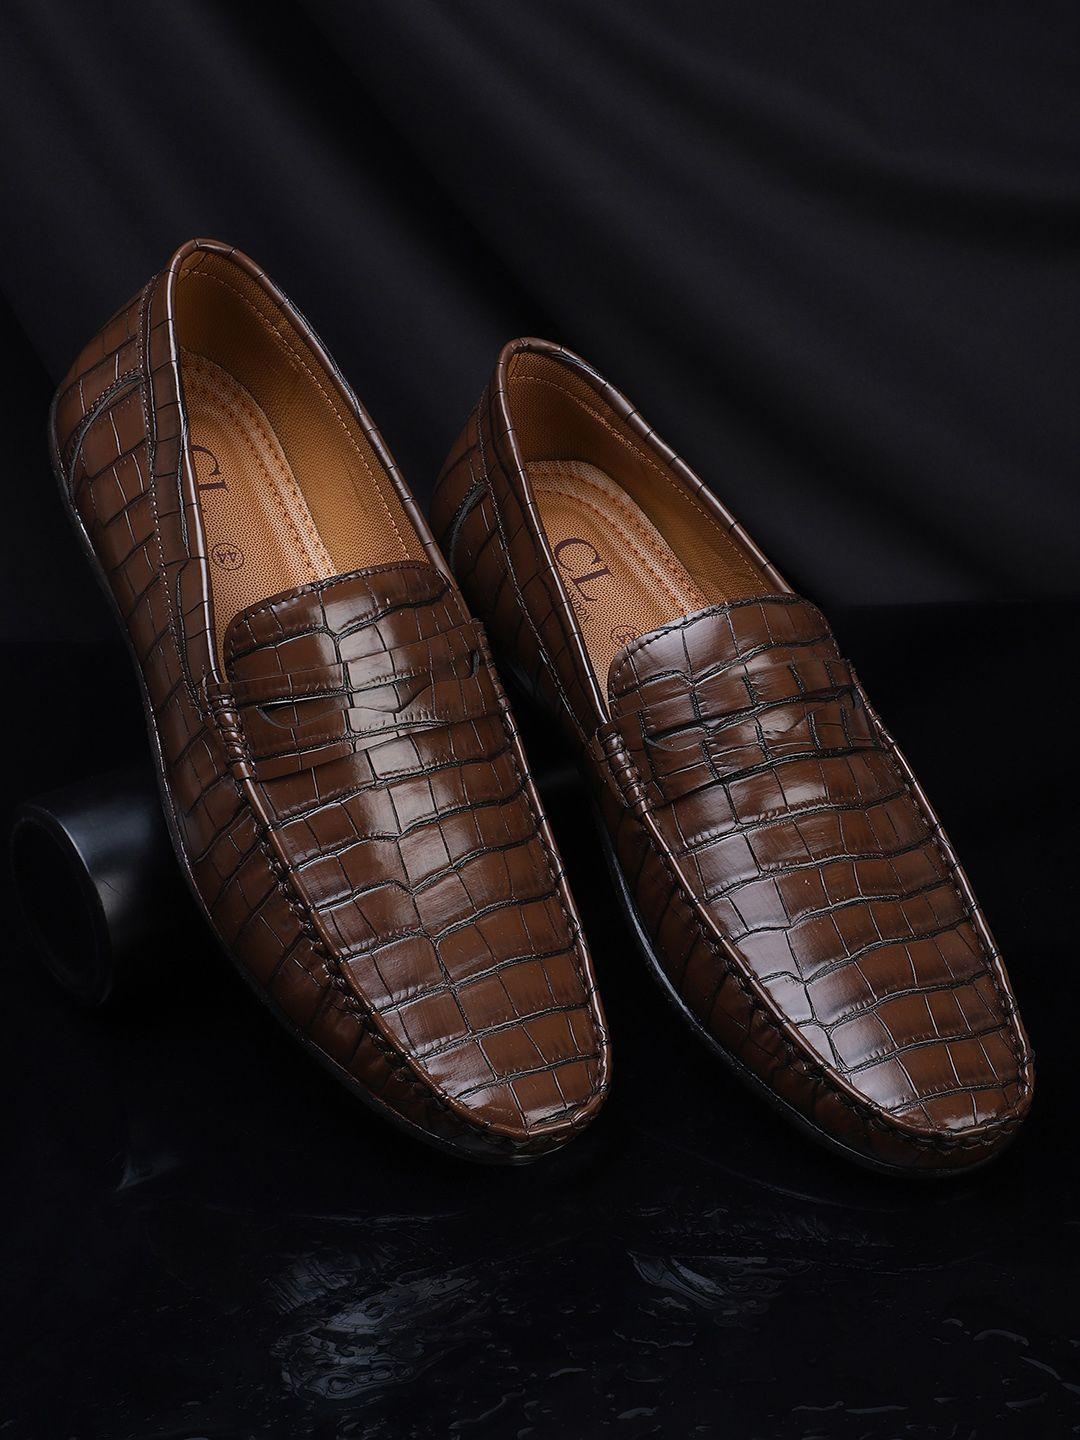 carlton-london-men-brown-textured-casual-loafers